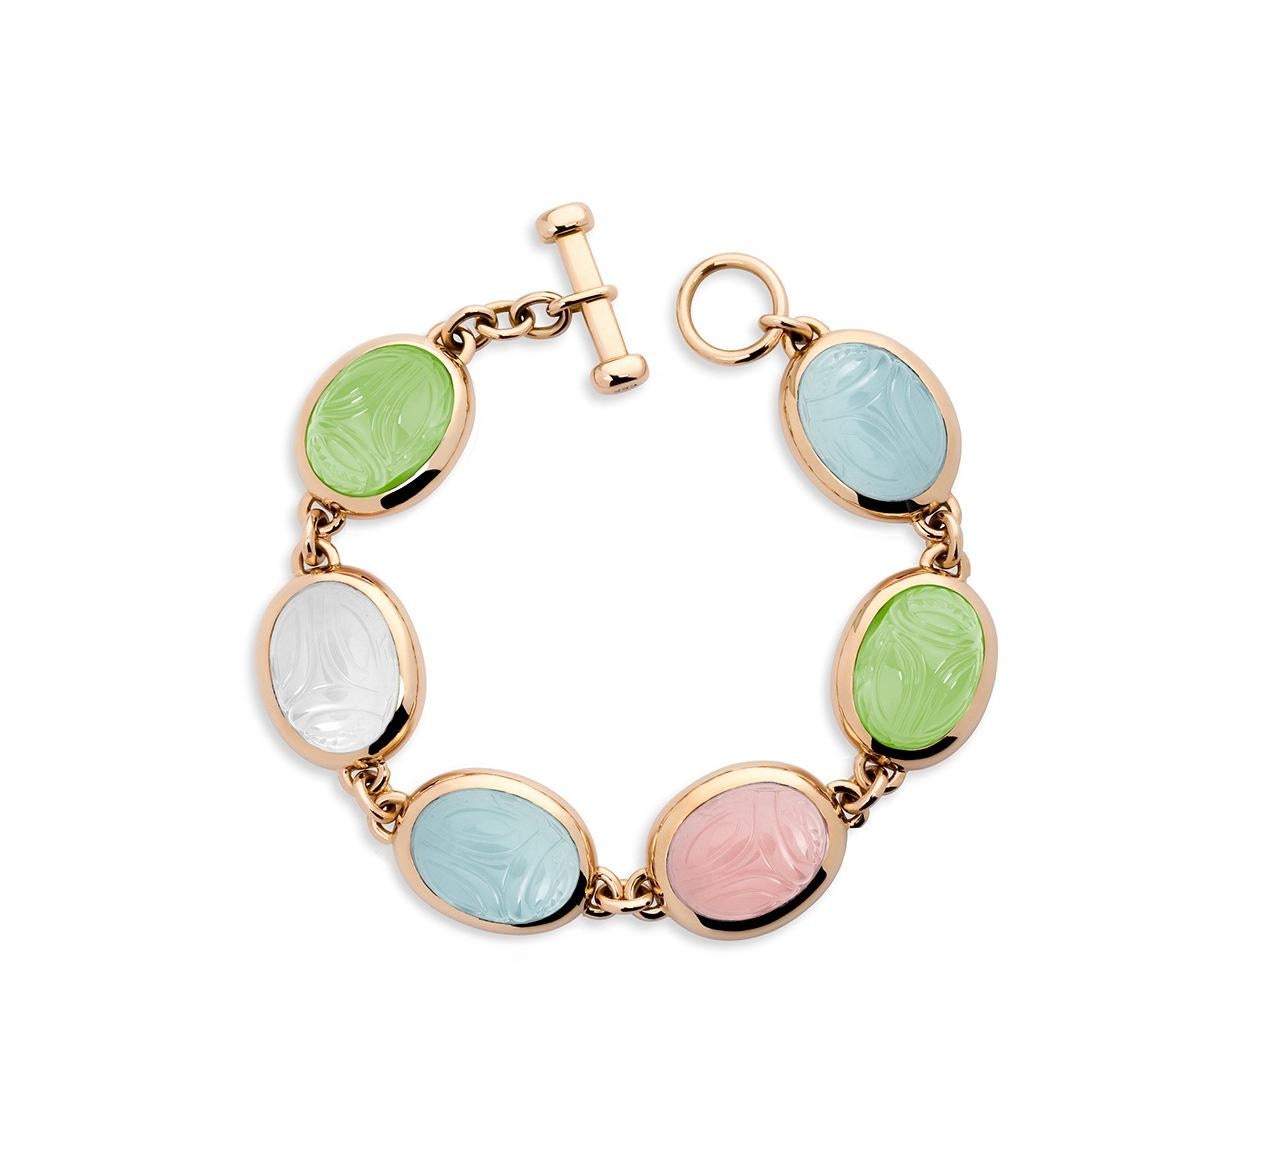 This very beautiful Scarab Bracelet in 18 carat rose gold with 2 aquamarines 30.69 ct, 2 prehnite 27.82 ct, 1 rose quartz 15.19 ct and 1 milk quartz 15.00 ct. In old Egypt the scarab was a symbol for resurrection and life and since that time a lucky